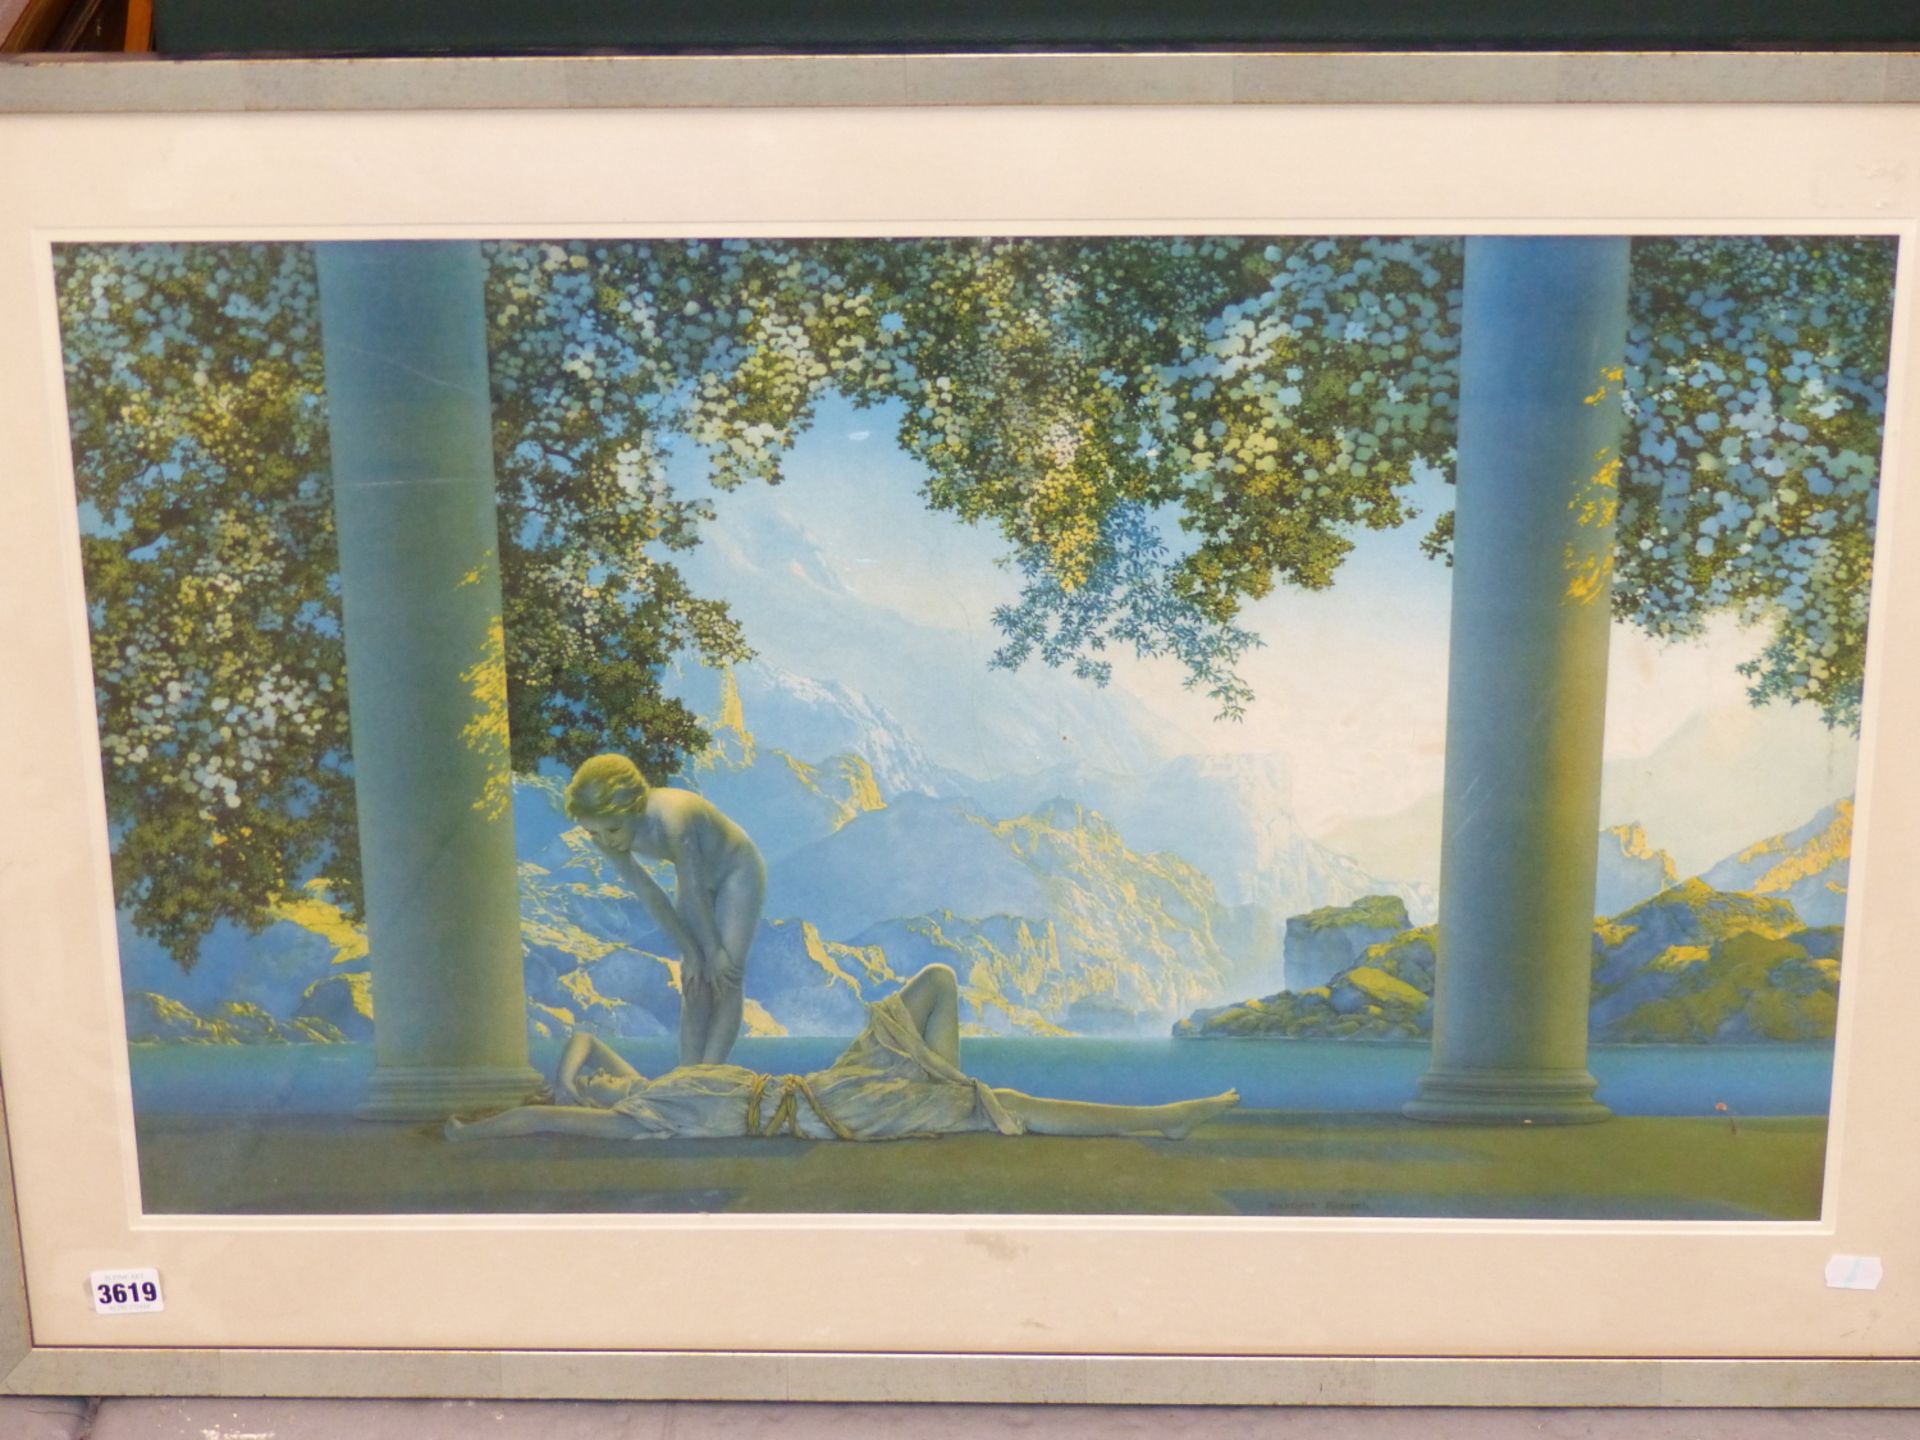 AFTER MAXFIELD PARRISH (1870-1966) "DAYBREAK" COLOUR PRINT 74 X 44 cm. - Image 2 of 4